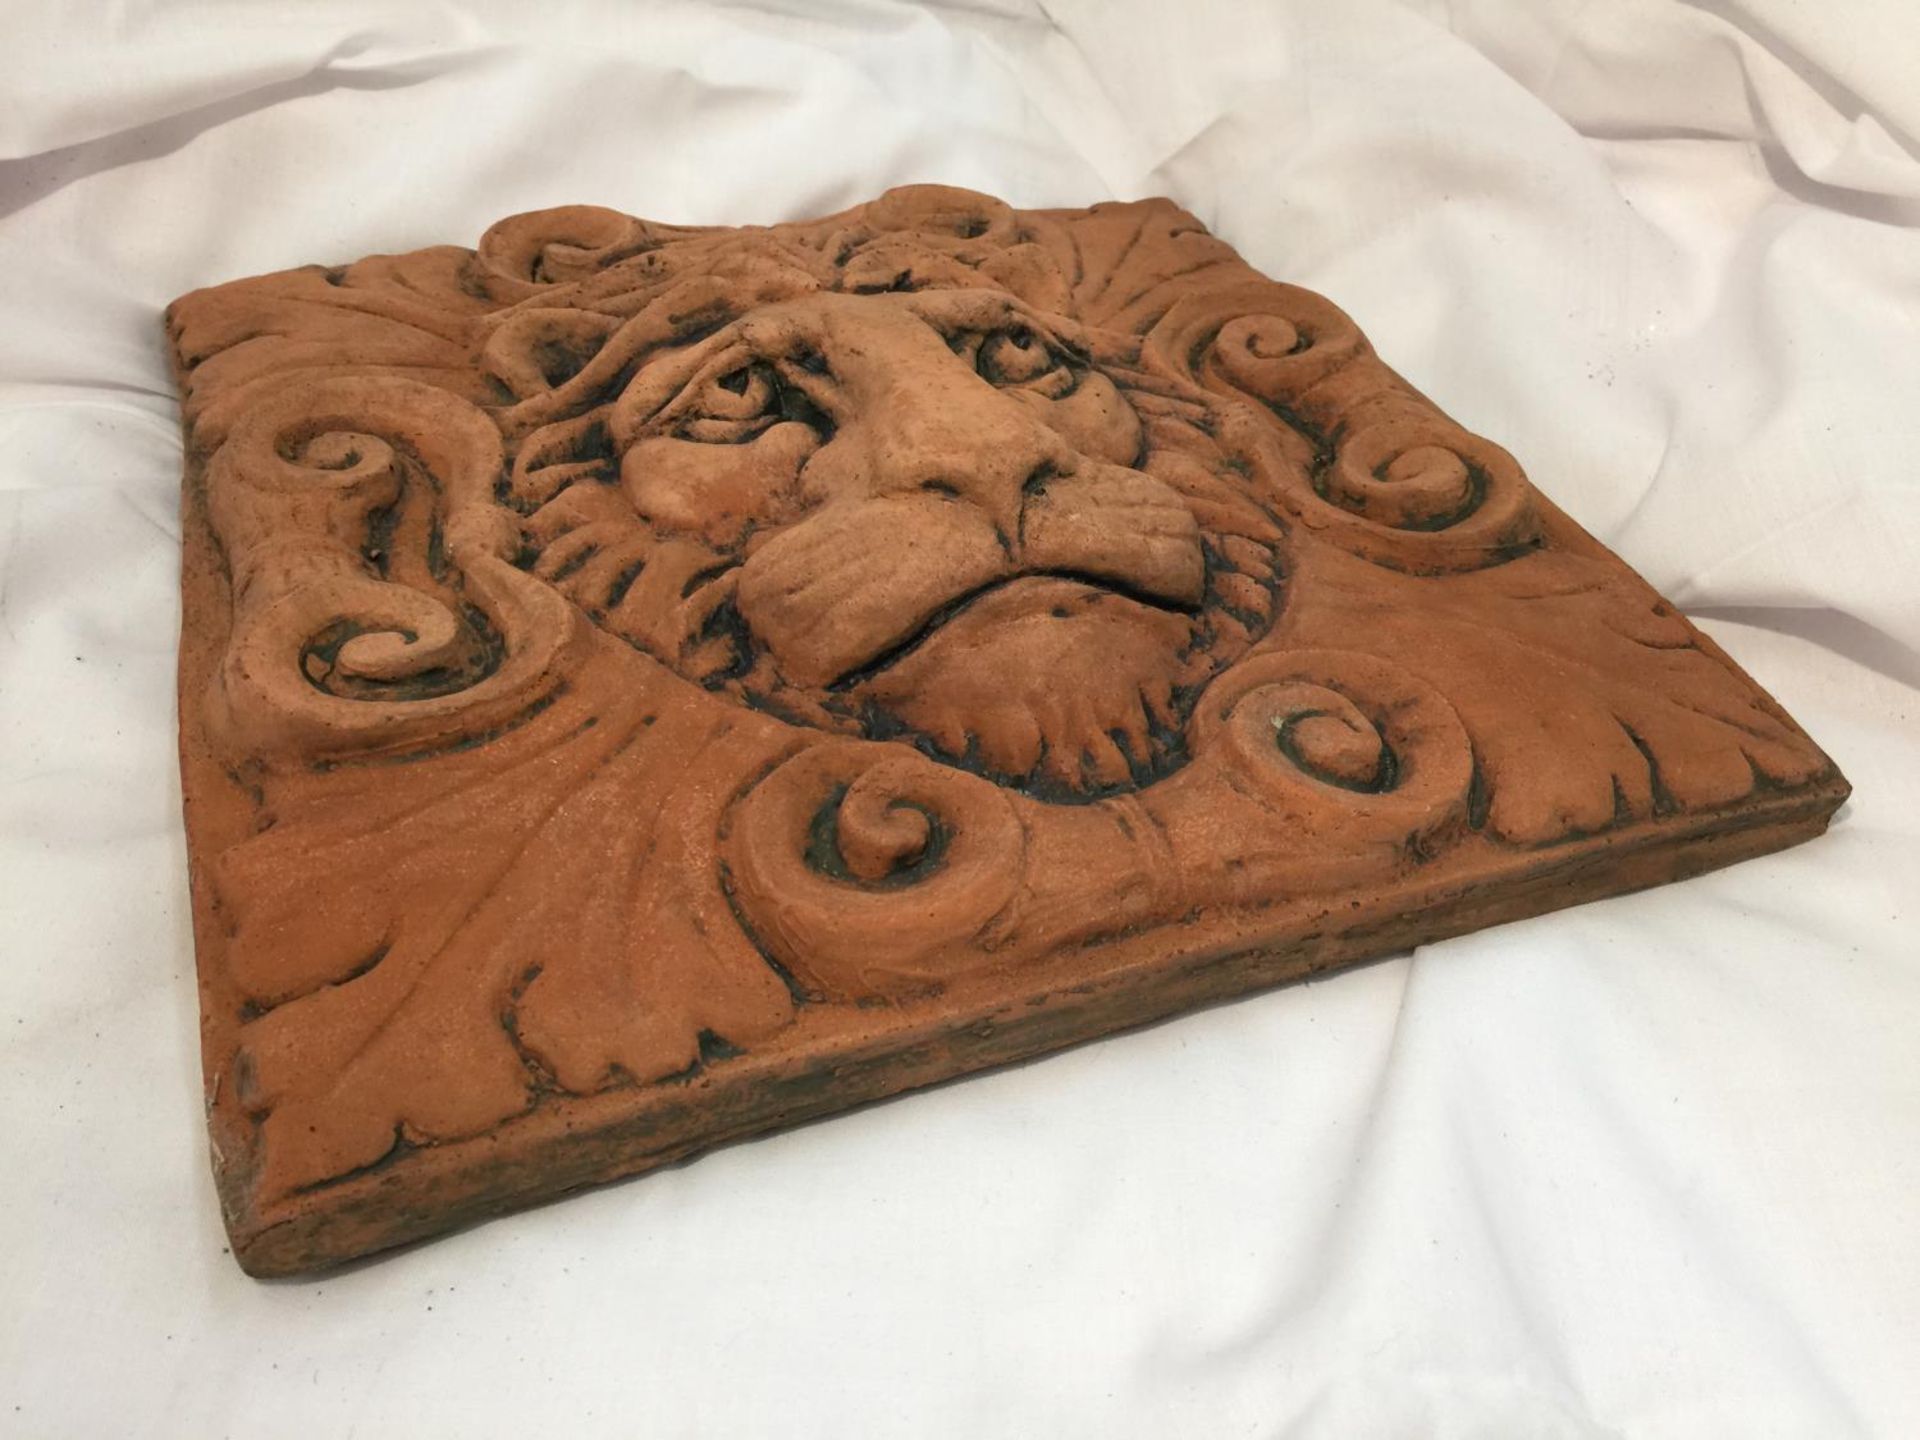 A TERRACTTA STONE WALL PLAQUE DEPICTING A LIONS HEAD 30CM X 30CM - Image 2 of 2